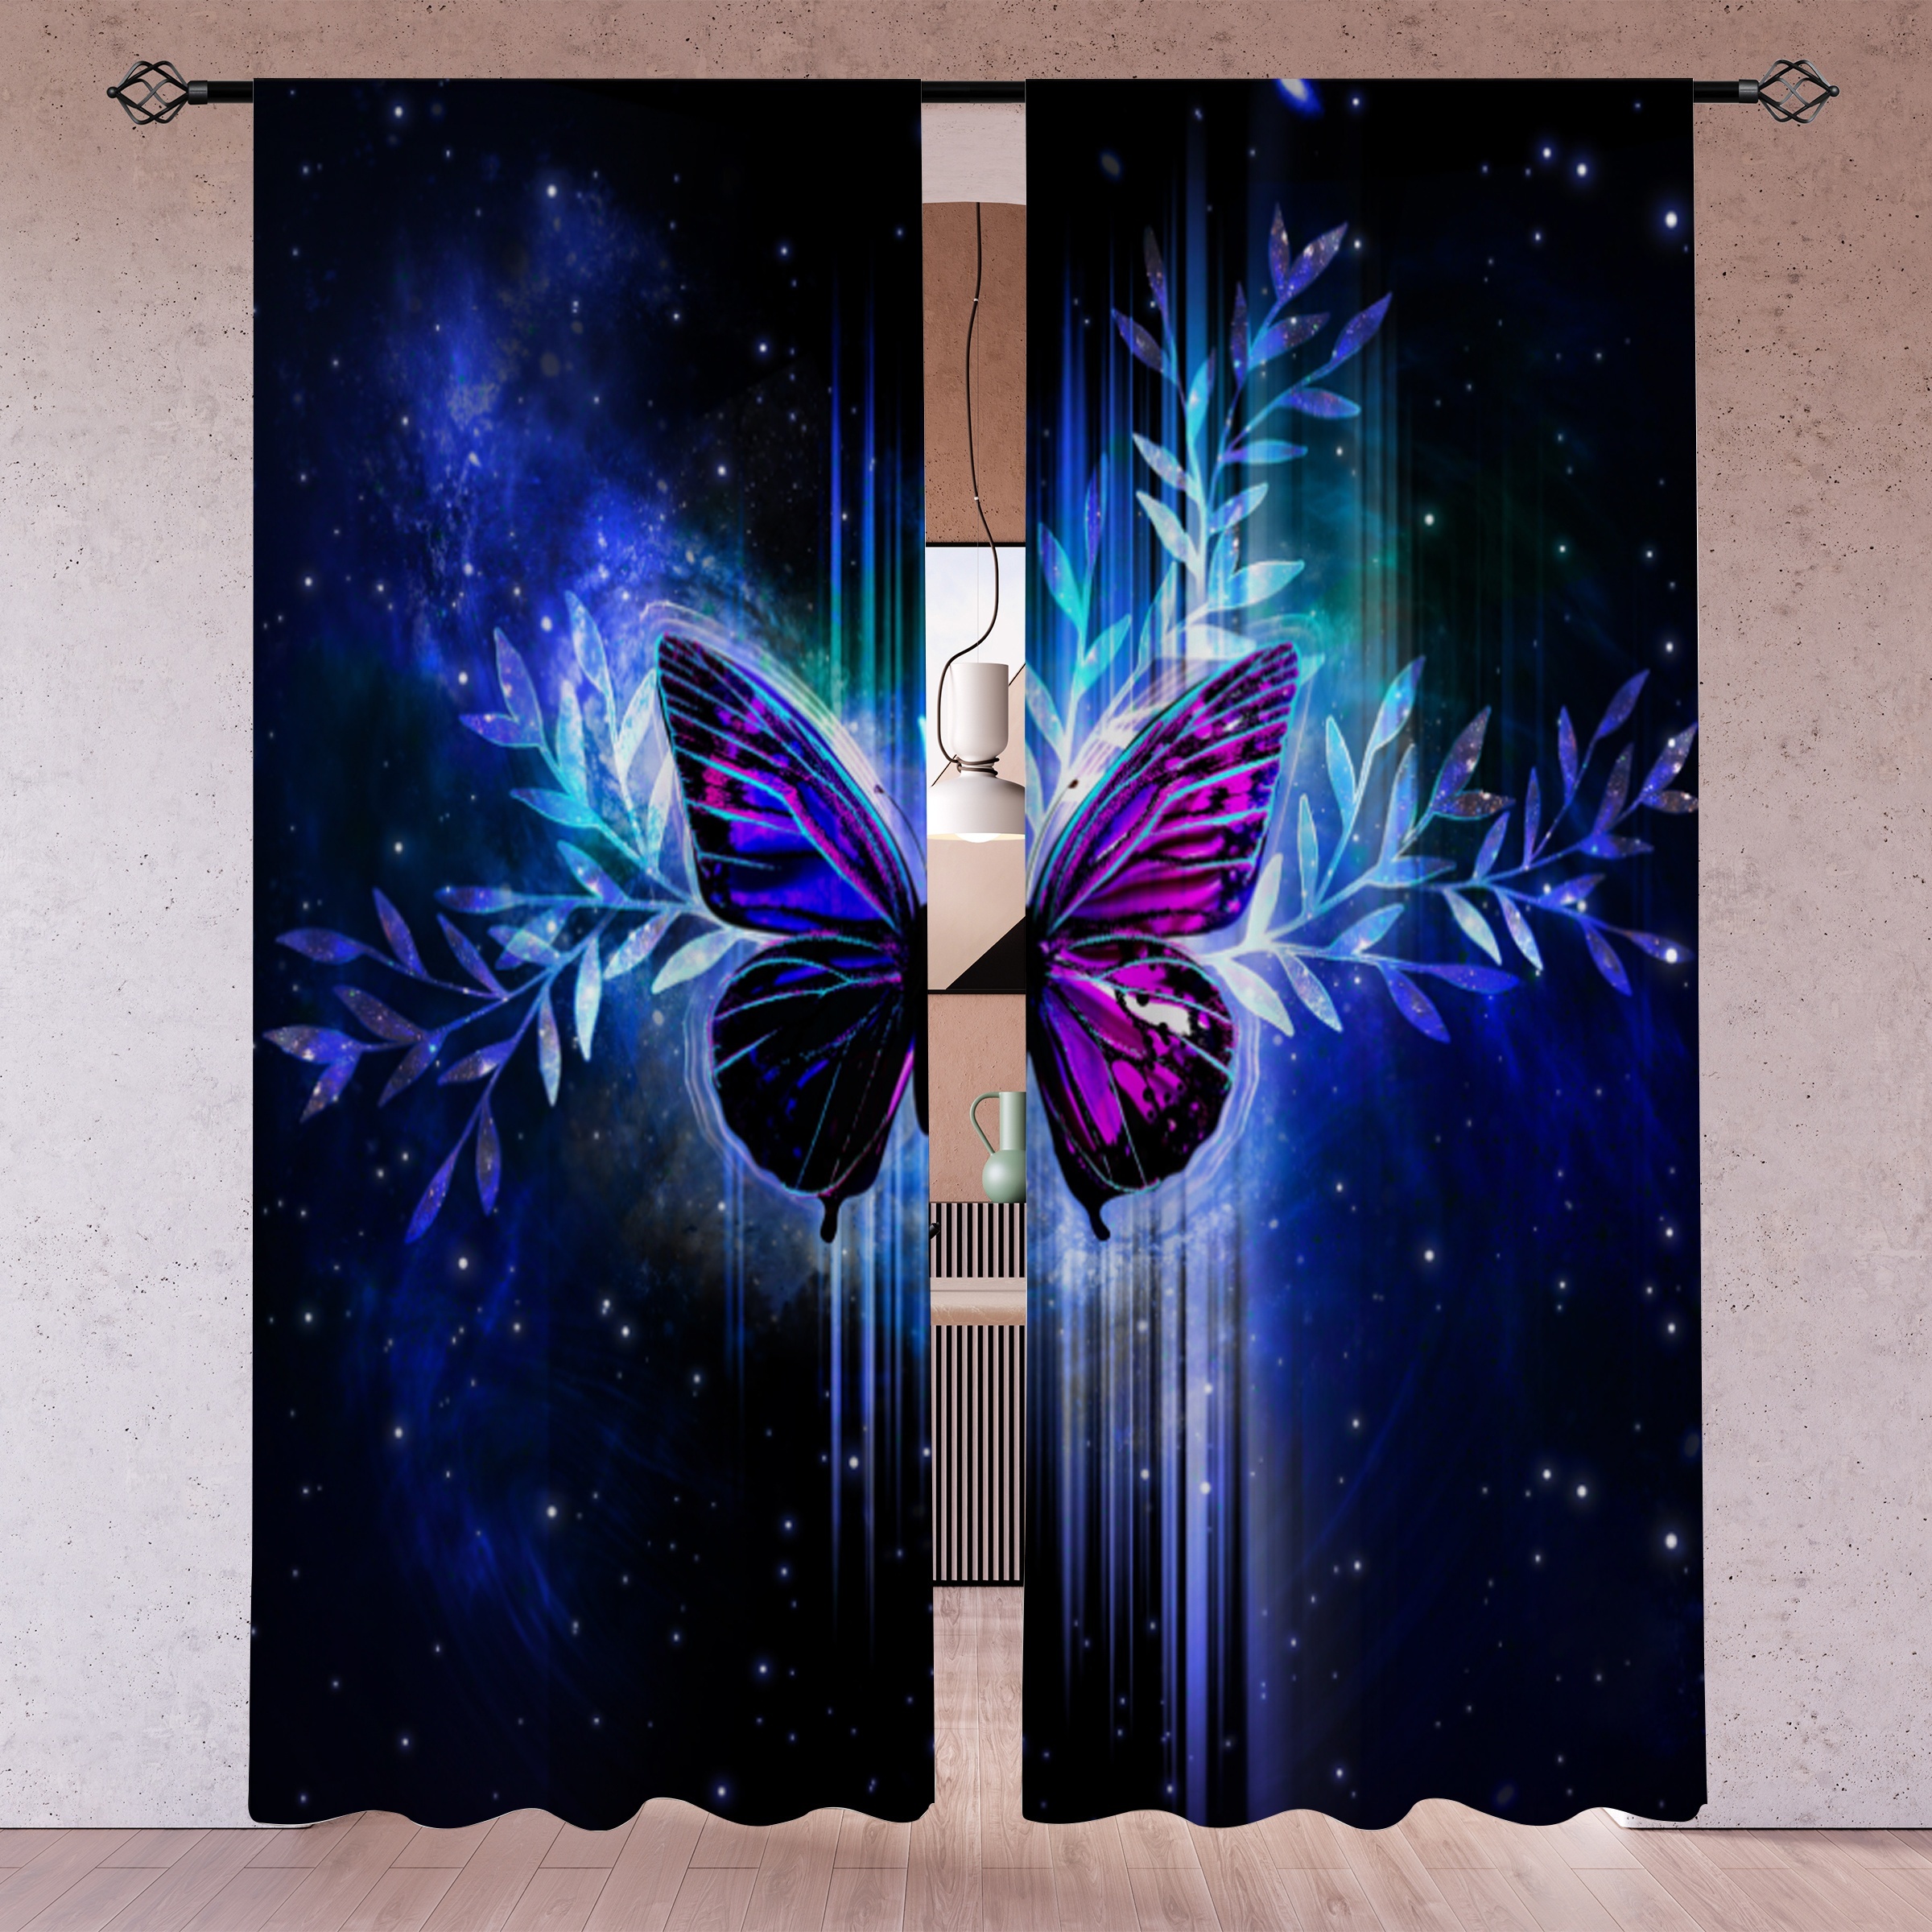 

2pcs, Magic Starry Sky Butterfly Printed Translucent Curtains, Multi-scene Polyester Rod Pocket Decorative Curtains For Living Room Gaming Room Bedroom Home Decor Party Supplies